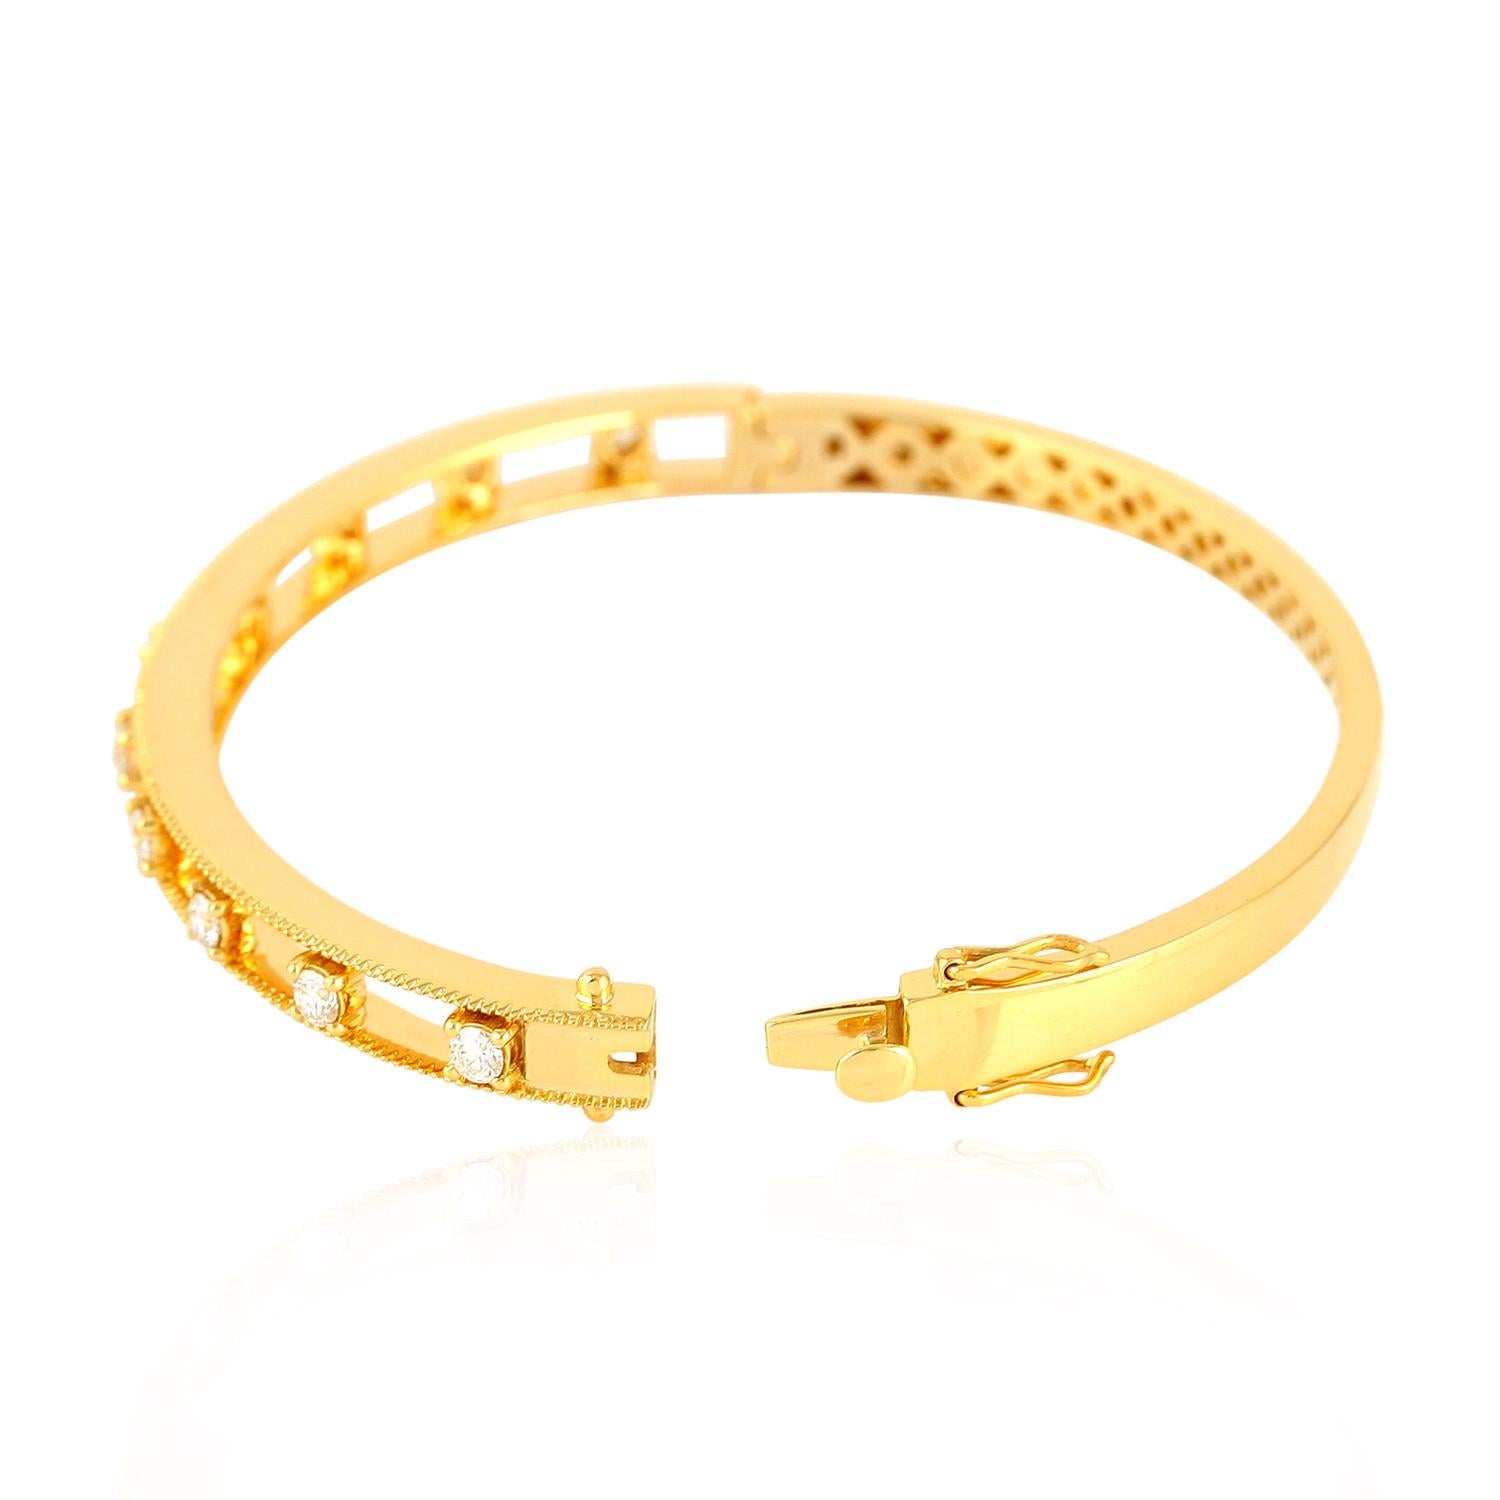 This lovely oval shape diamond 18K yellow gold bangle is open-able on side with open box clasp with safety locks on side. This is a very fine bangle to stack with your favorite bangles. 

18Kt: 18.116g
Diamond: 0.82Ct
